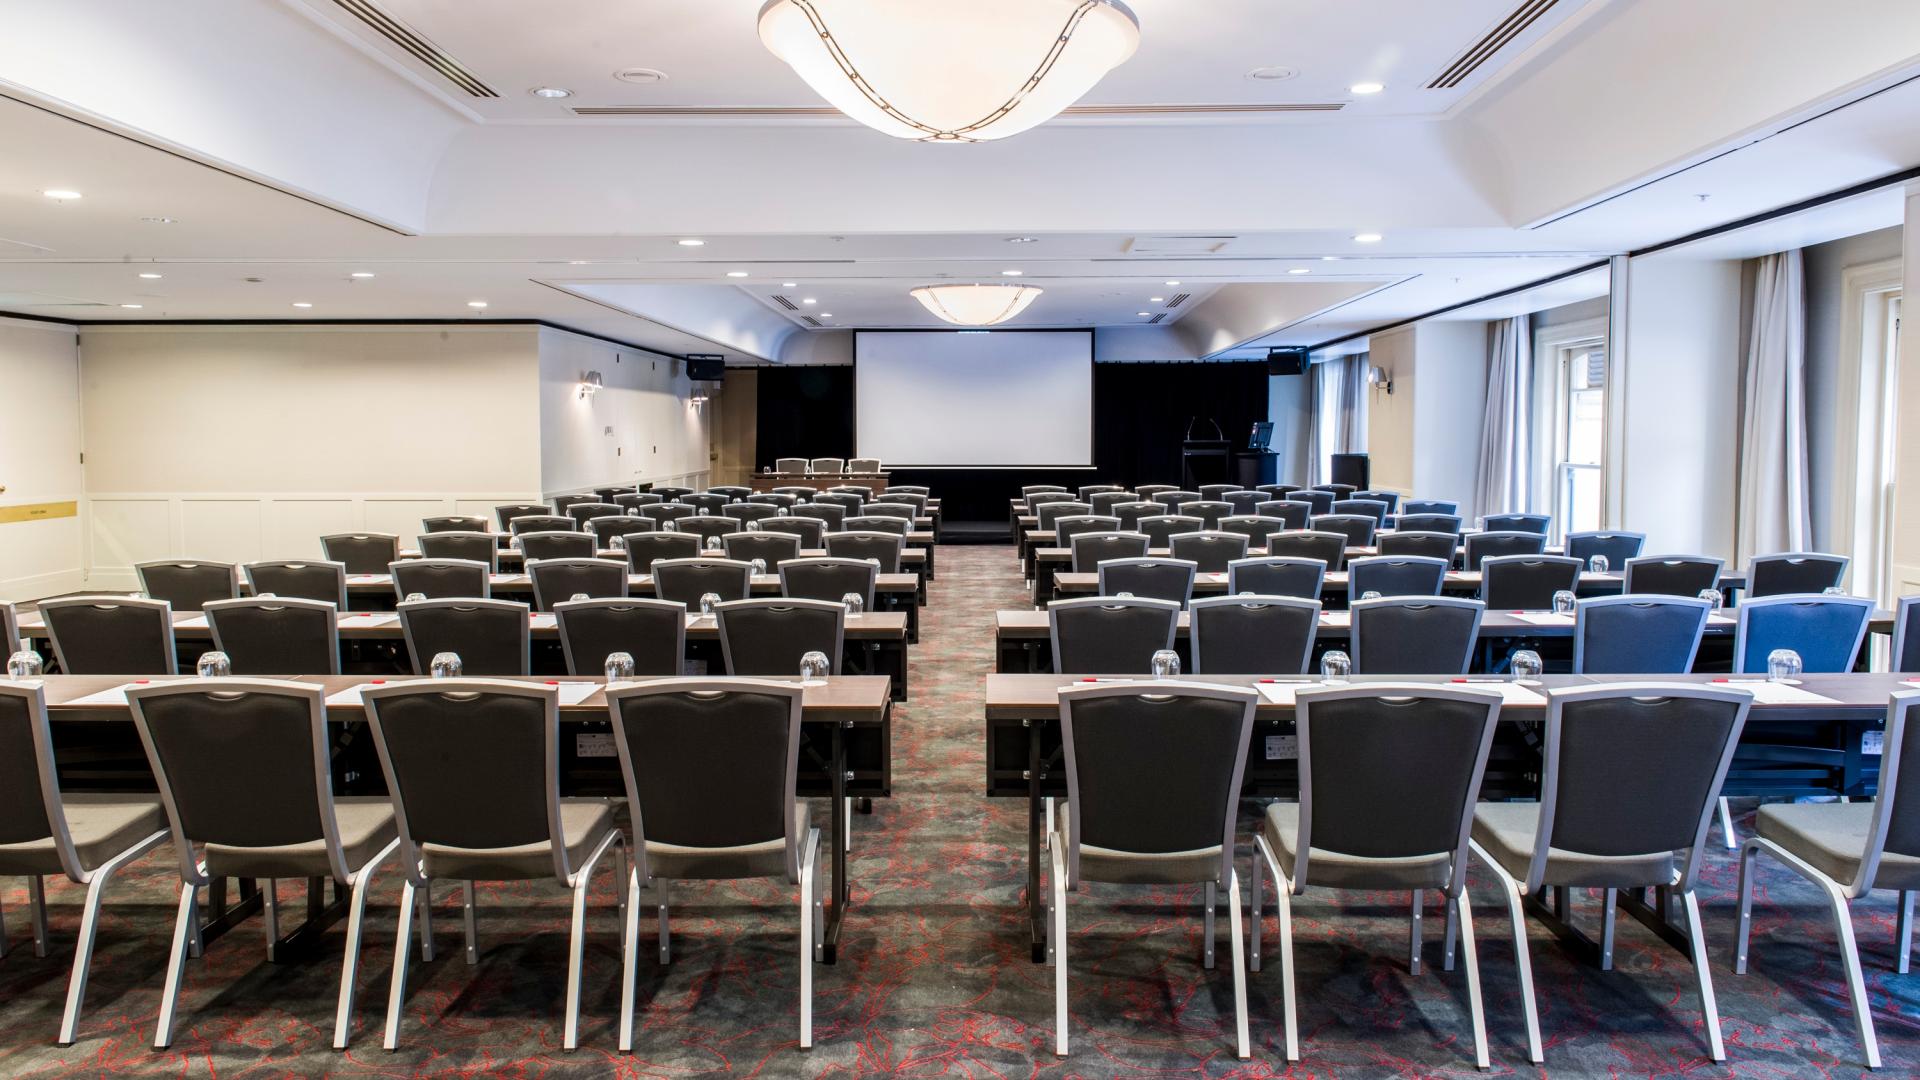 Find your Conference Hotel in Sydney